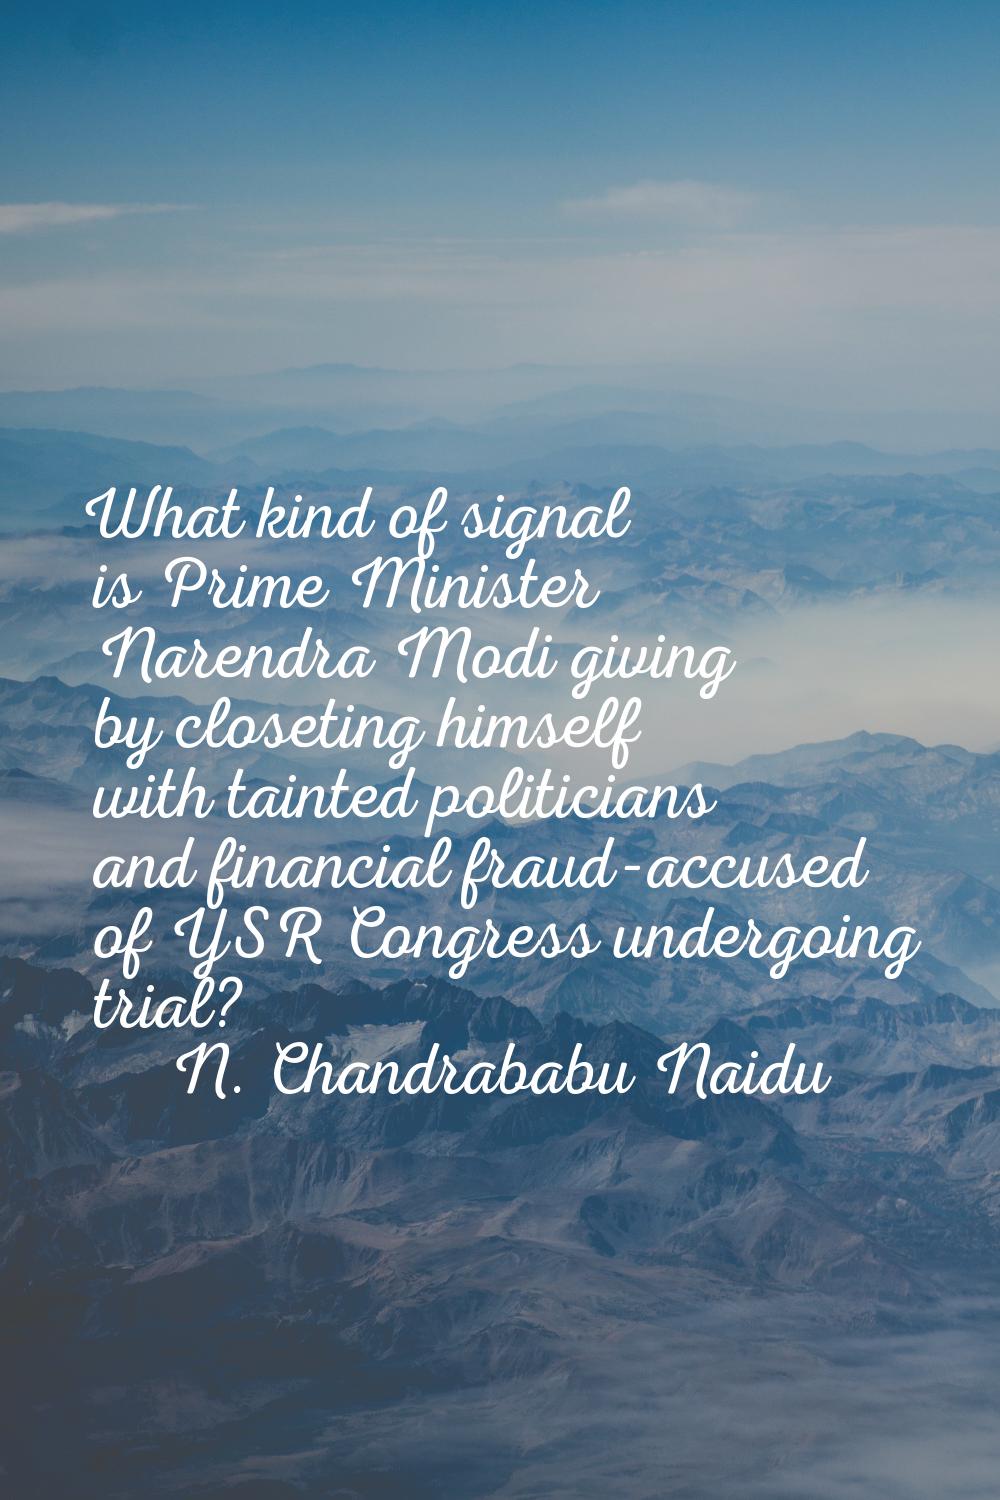 What kind of signal is Prime Minister Narendra Modi giving by closeting himself with tainted politi